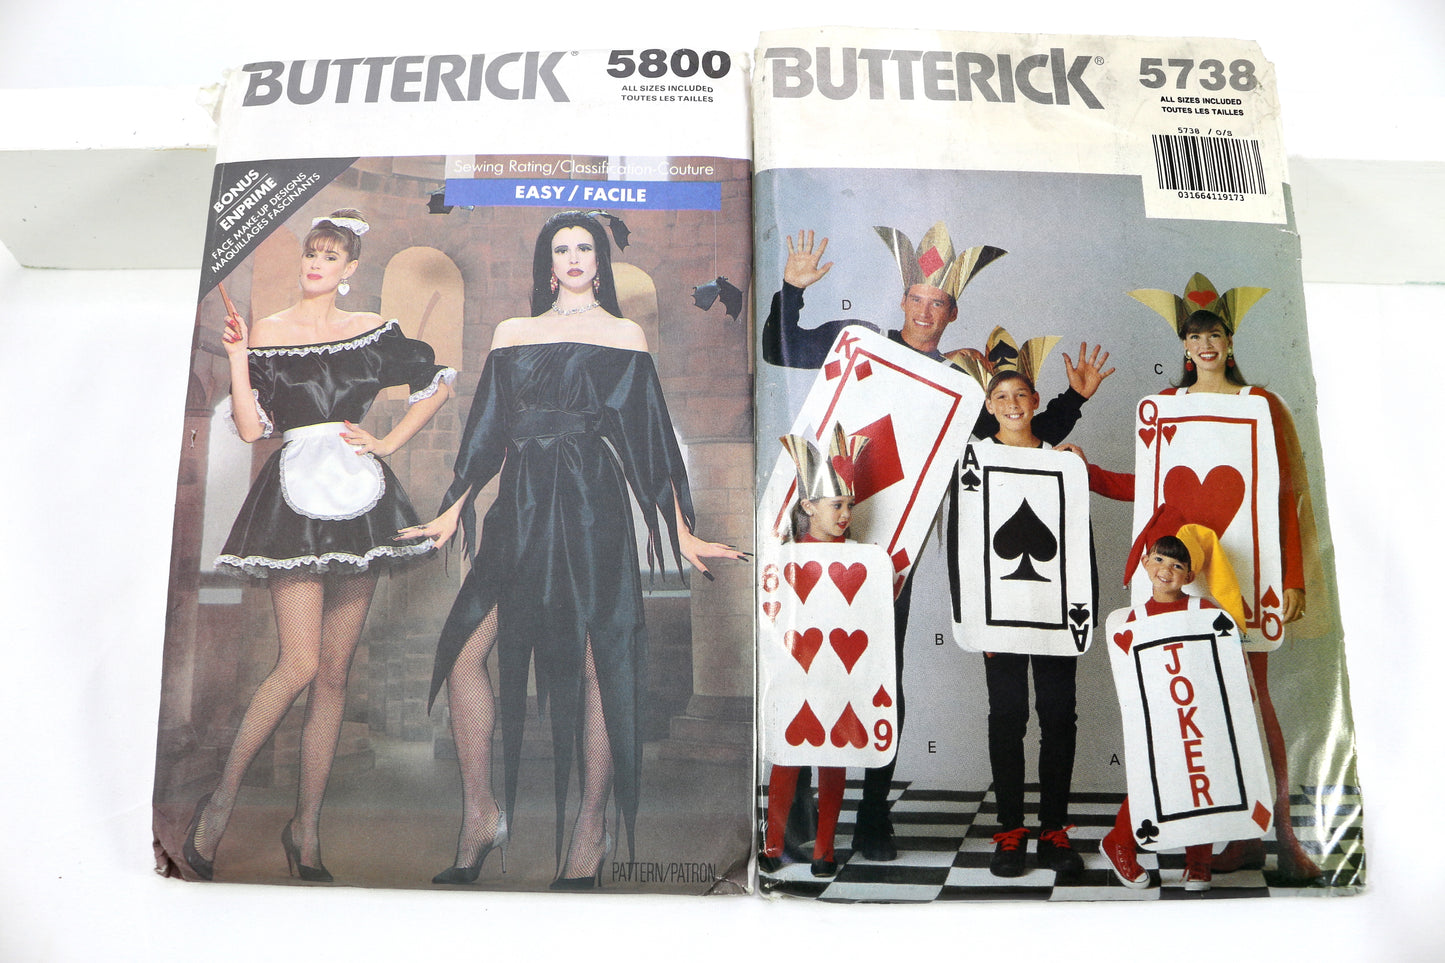 Butterick 5800 French Maid Costume Sewing Pattern or Butterick 5738 Card Playing Costume Sewing Pattern